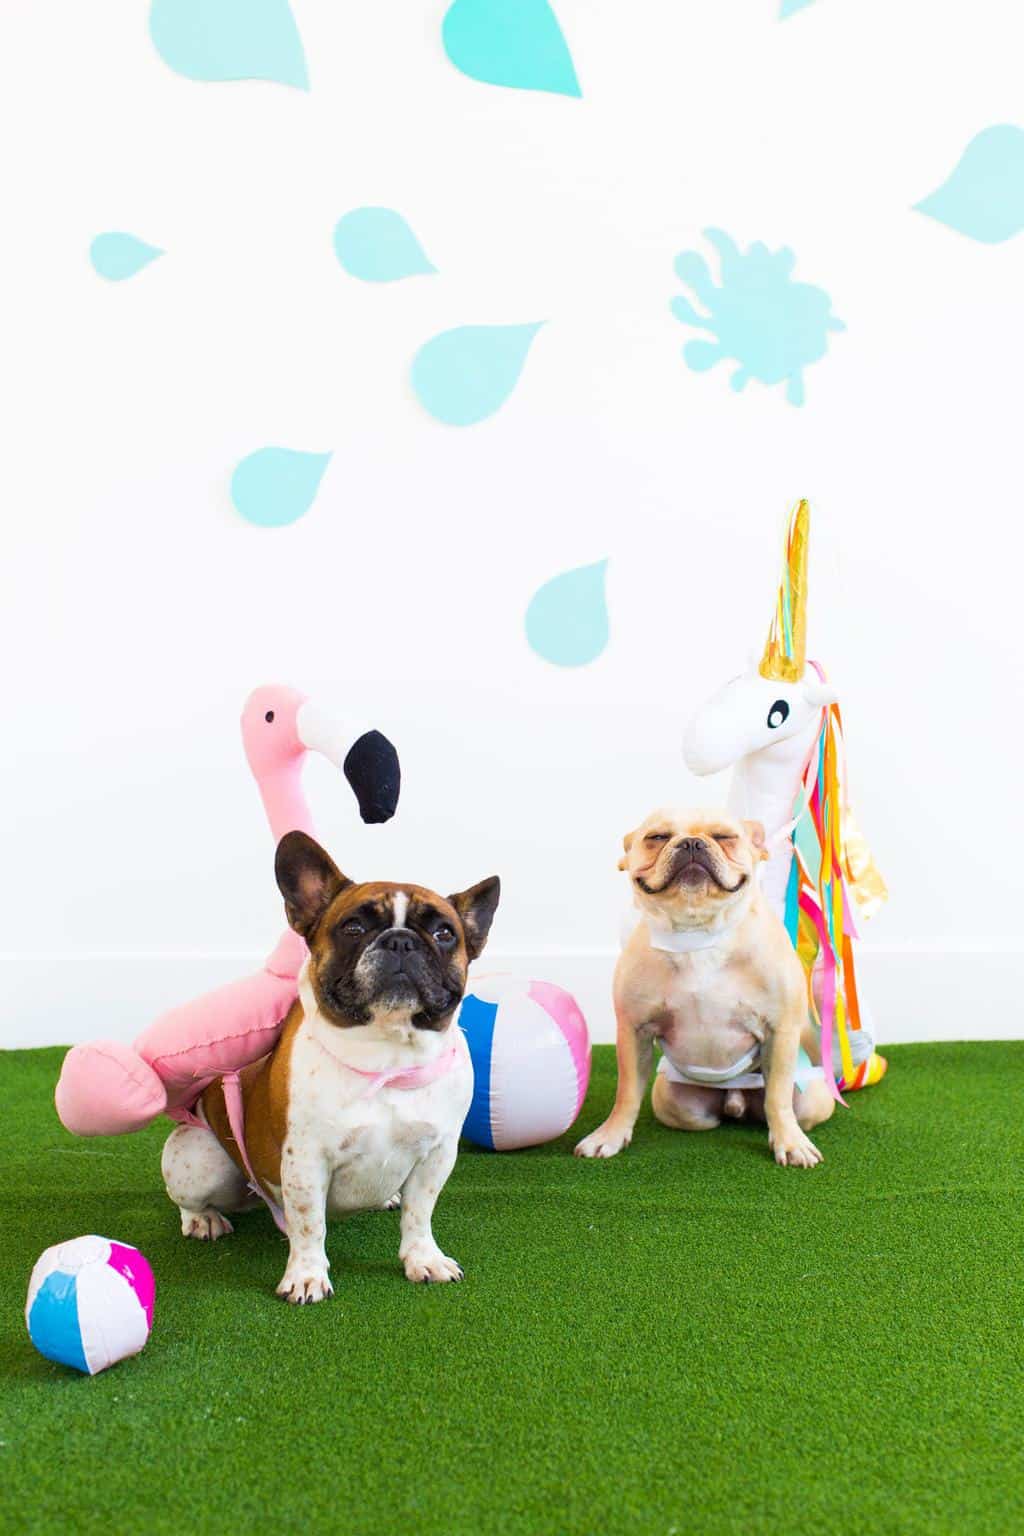 Summer never ends when you have DIY pool float dog costumes, am I right?! - sugar and cloth - halloween ideas - unicorn pool float - flamingo pool float